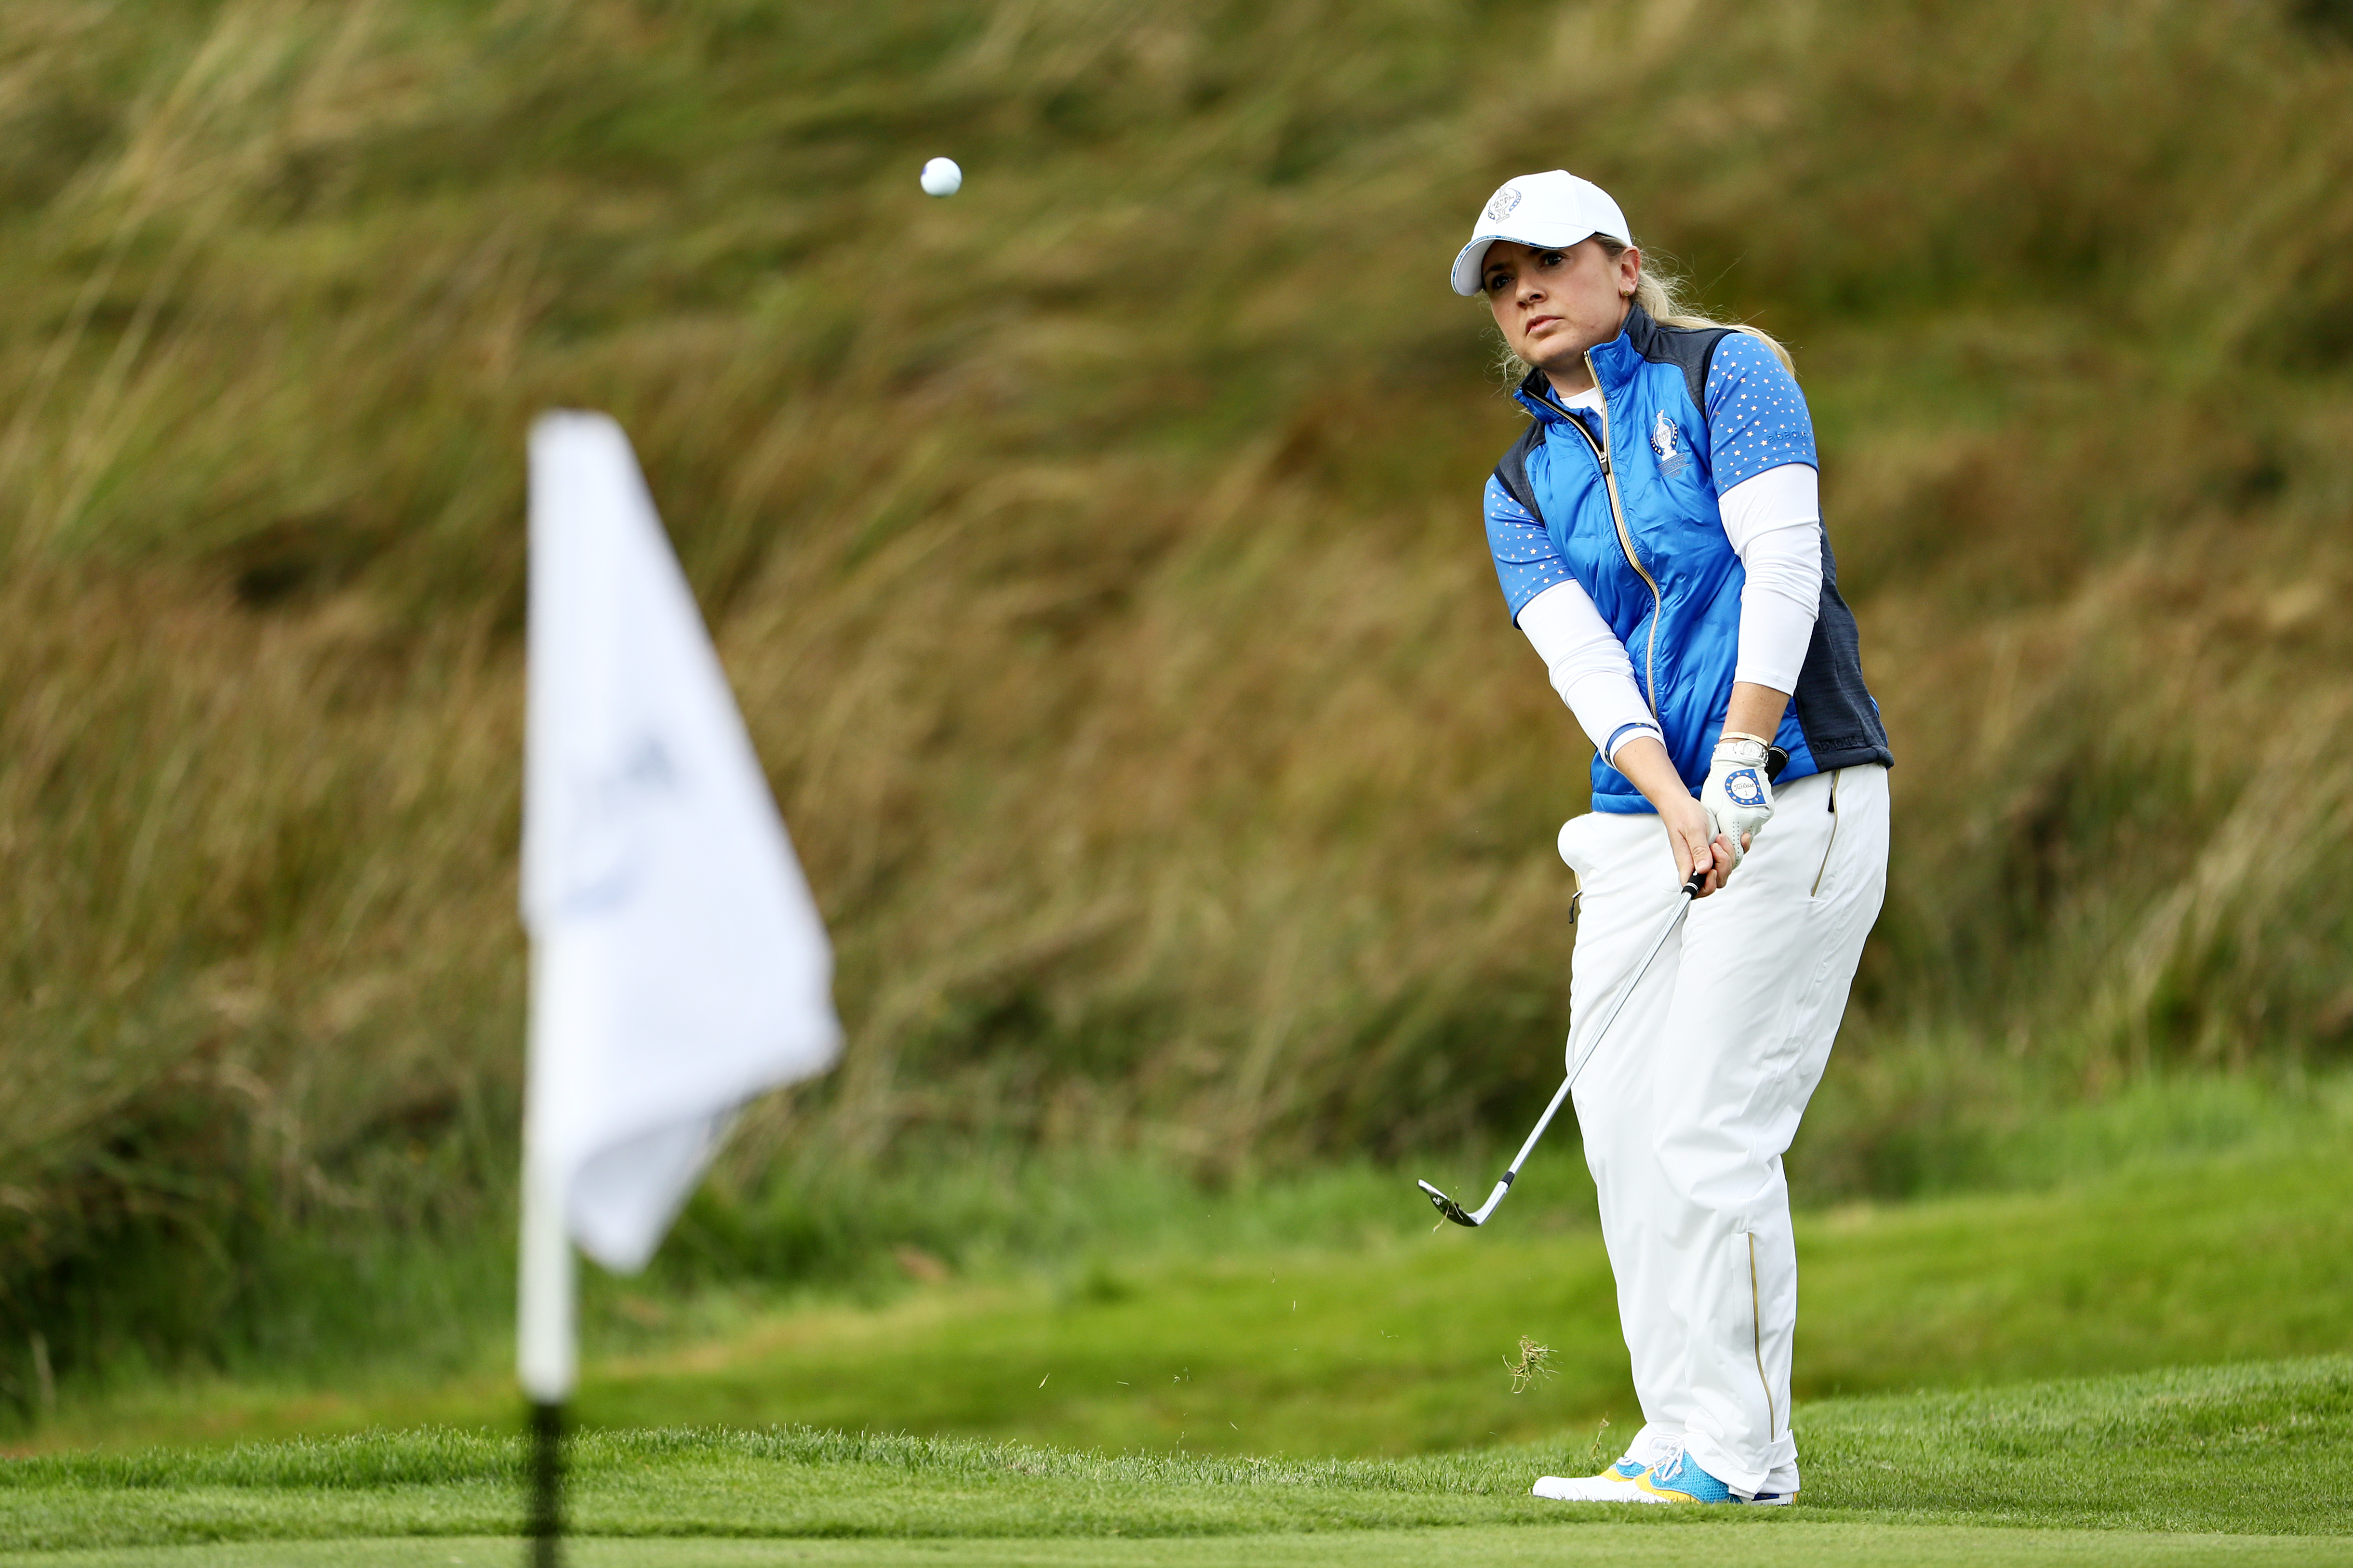 Bronte Law during her crucial match with Ally McDonald during the final day singles at the Solheim Cup.